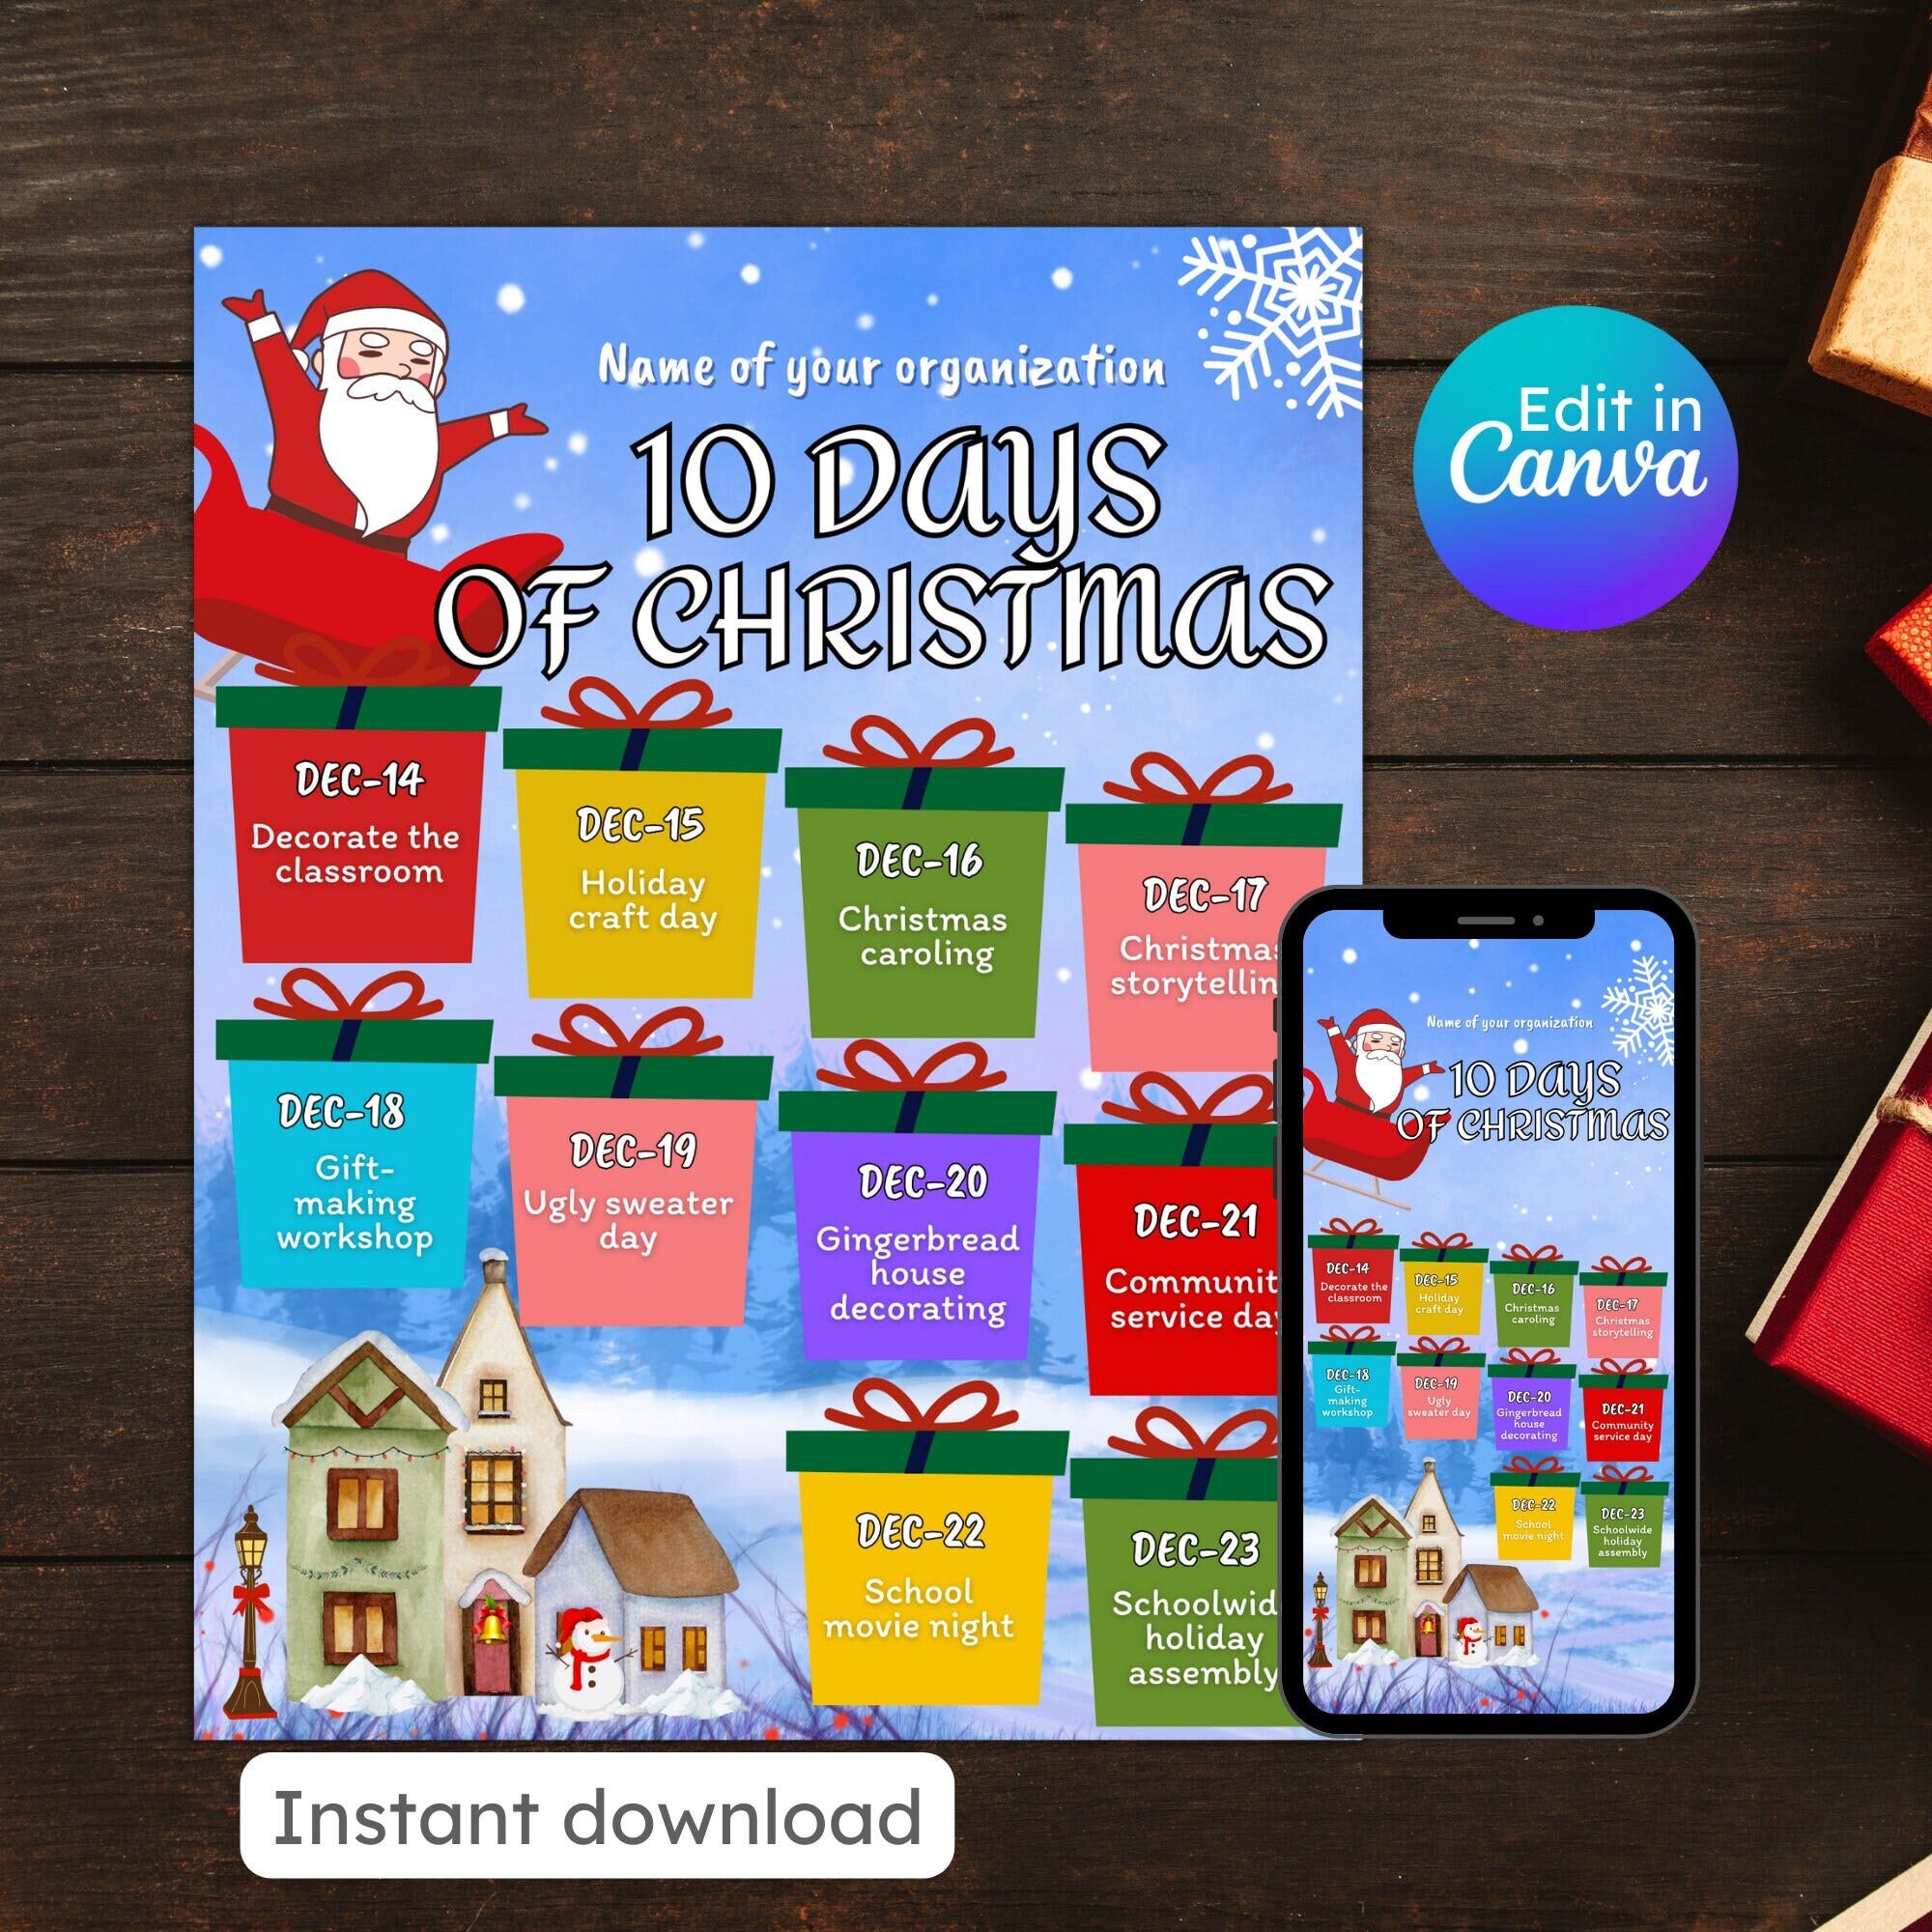 10 days of christmas flyer xmas countdown days until christmas Santa Claus kids advent editable printable instant download